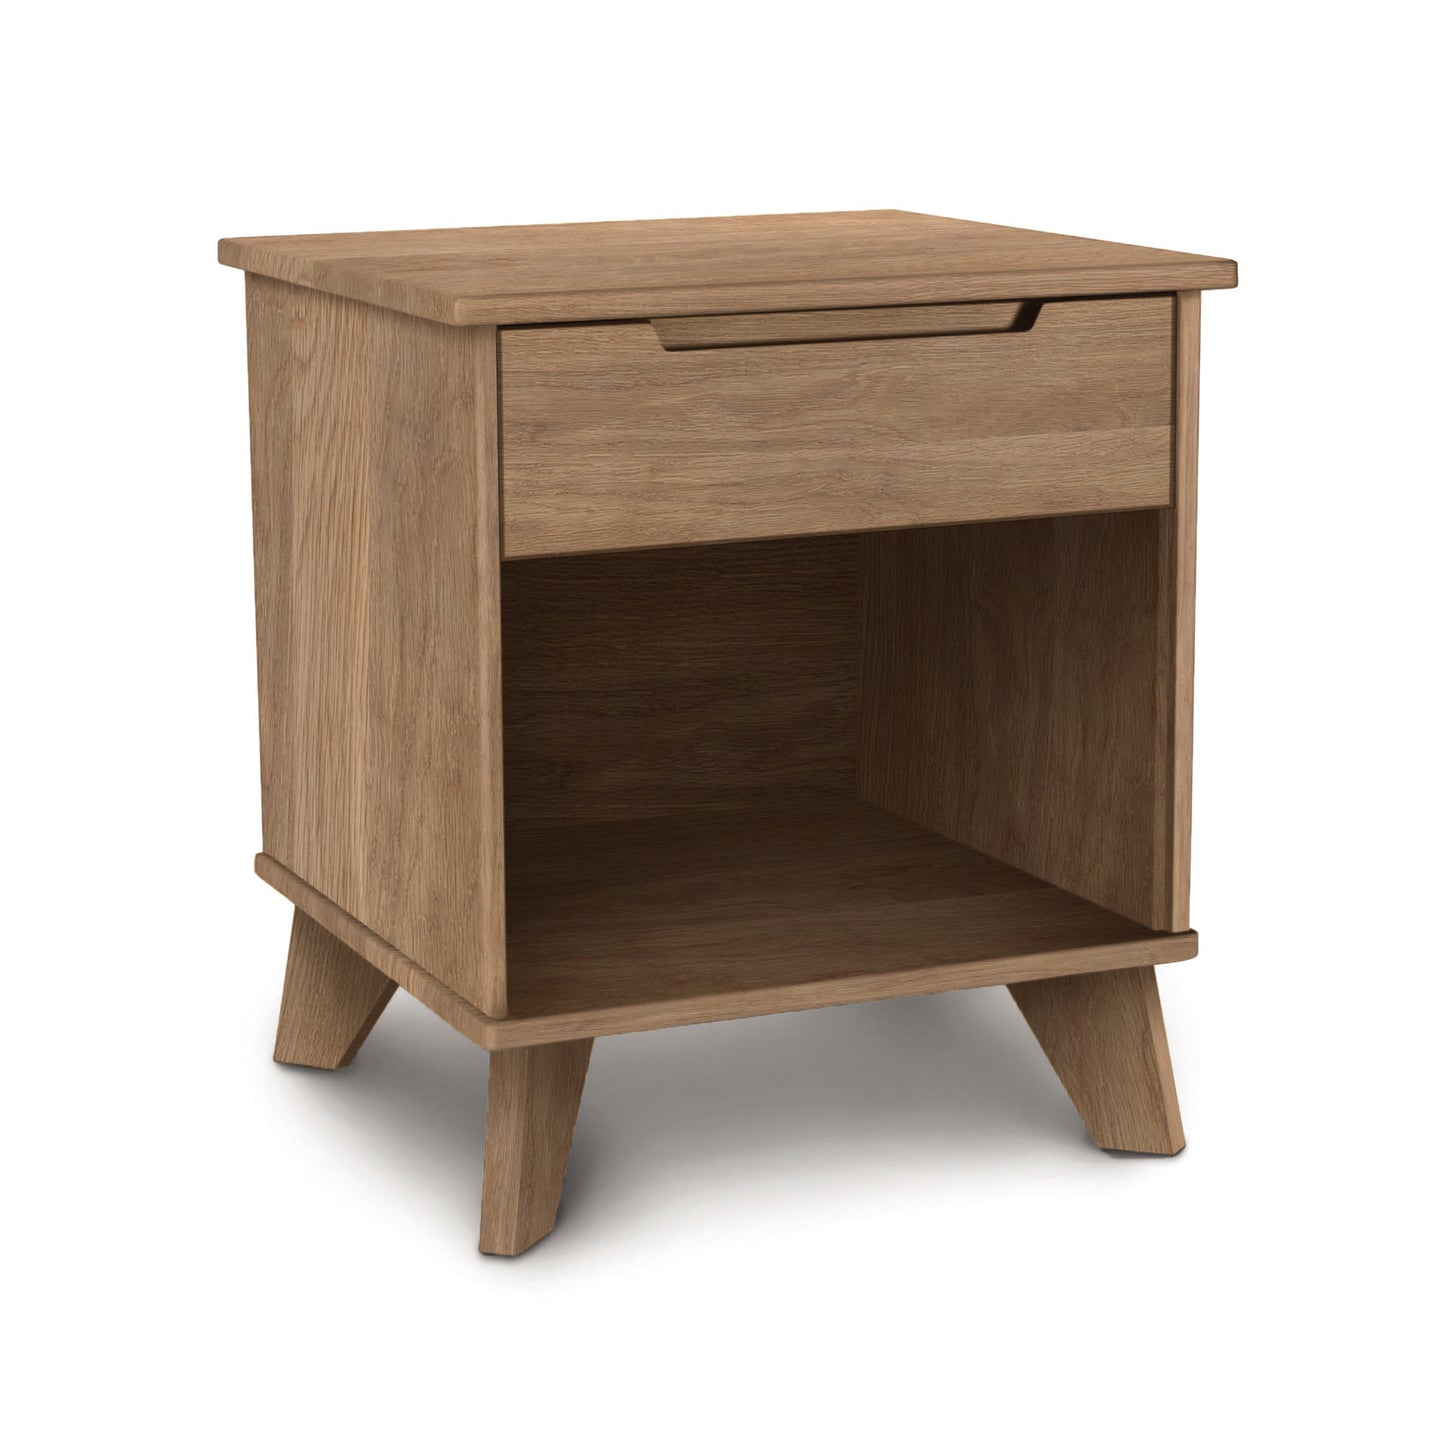 A Linn 1-Drawer Enclosed Shelf Nightstand by Copeland Furniture, crafted from sustainable solid wood and isolated on a white background.